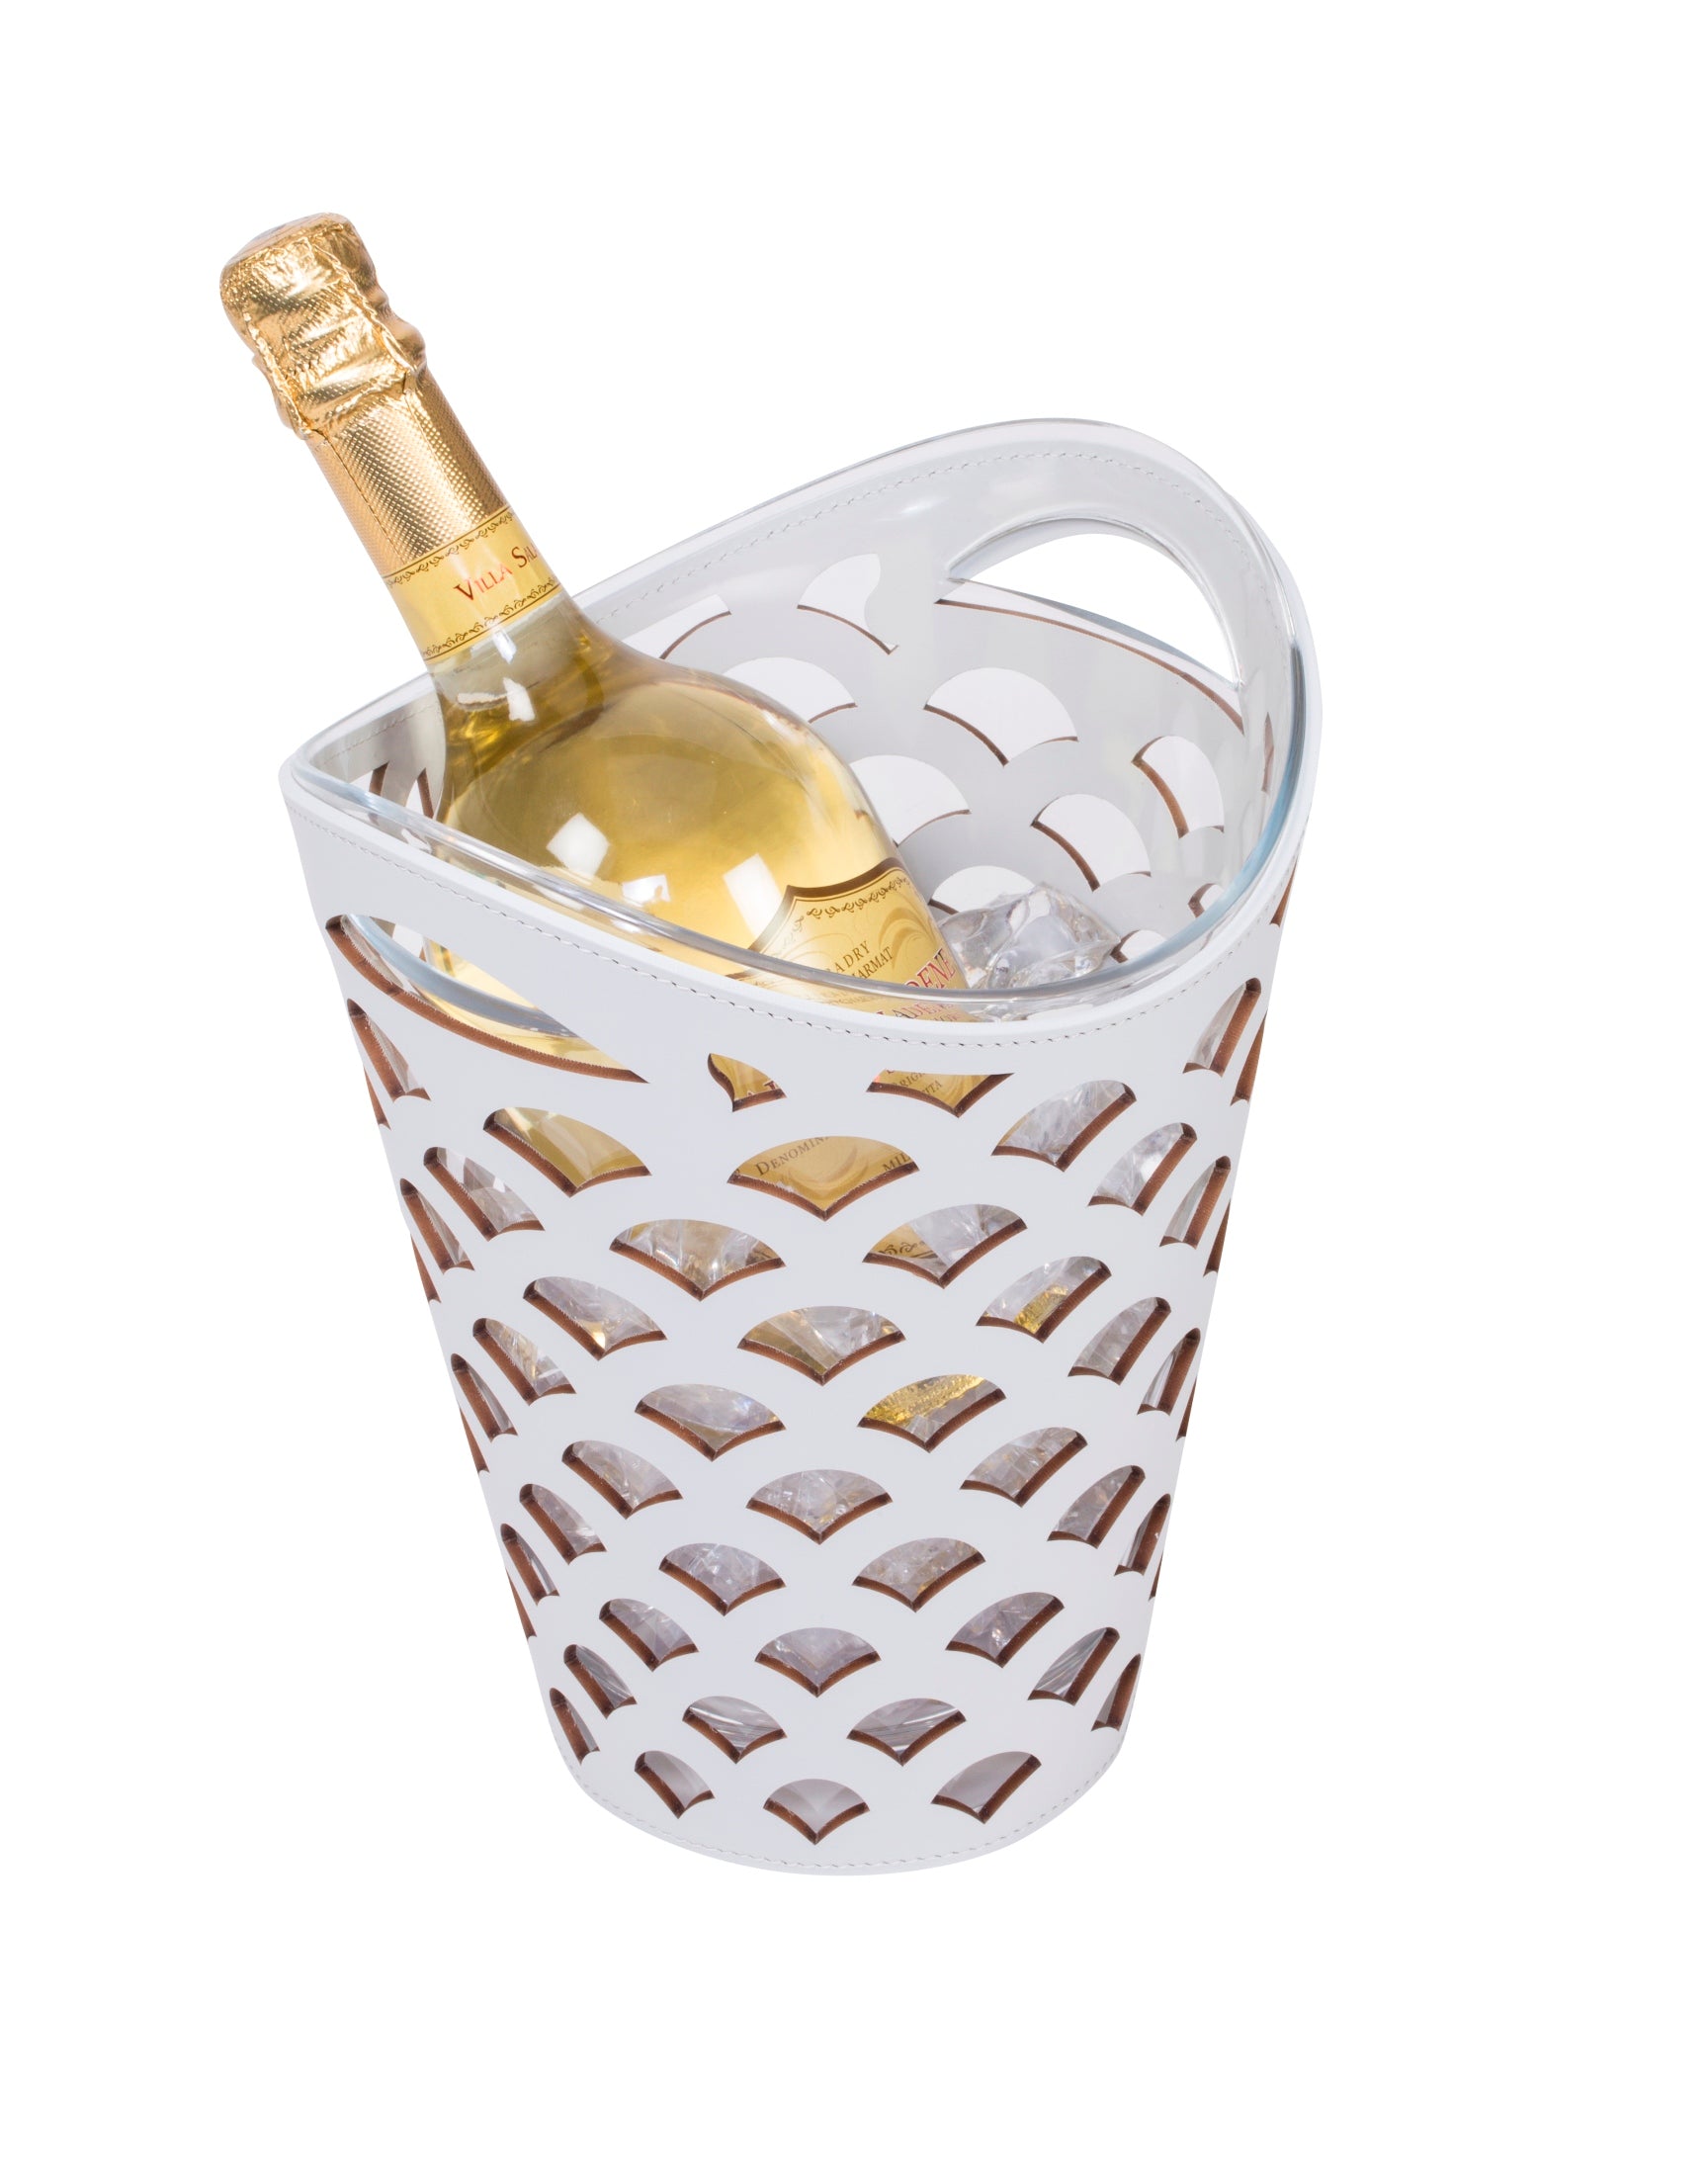 RUDI Cortina Champagne Bucket | 2Jour Concierge, #1 luxury high-end gift & lifestyle shop